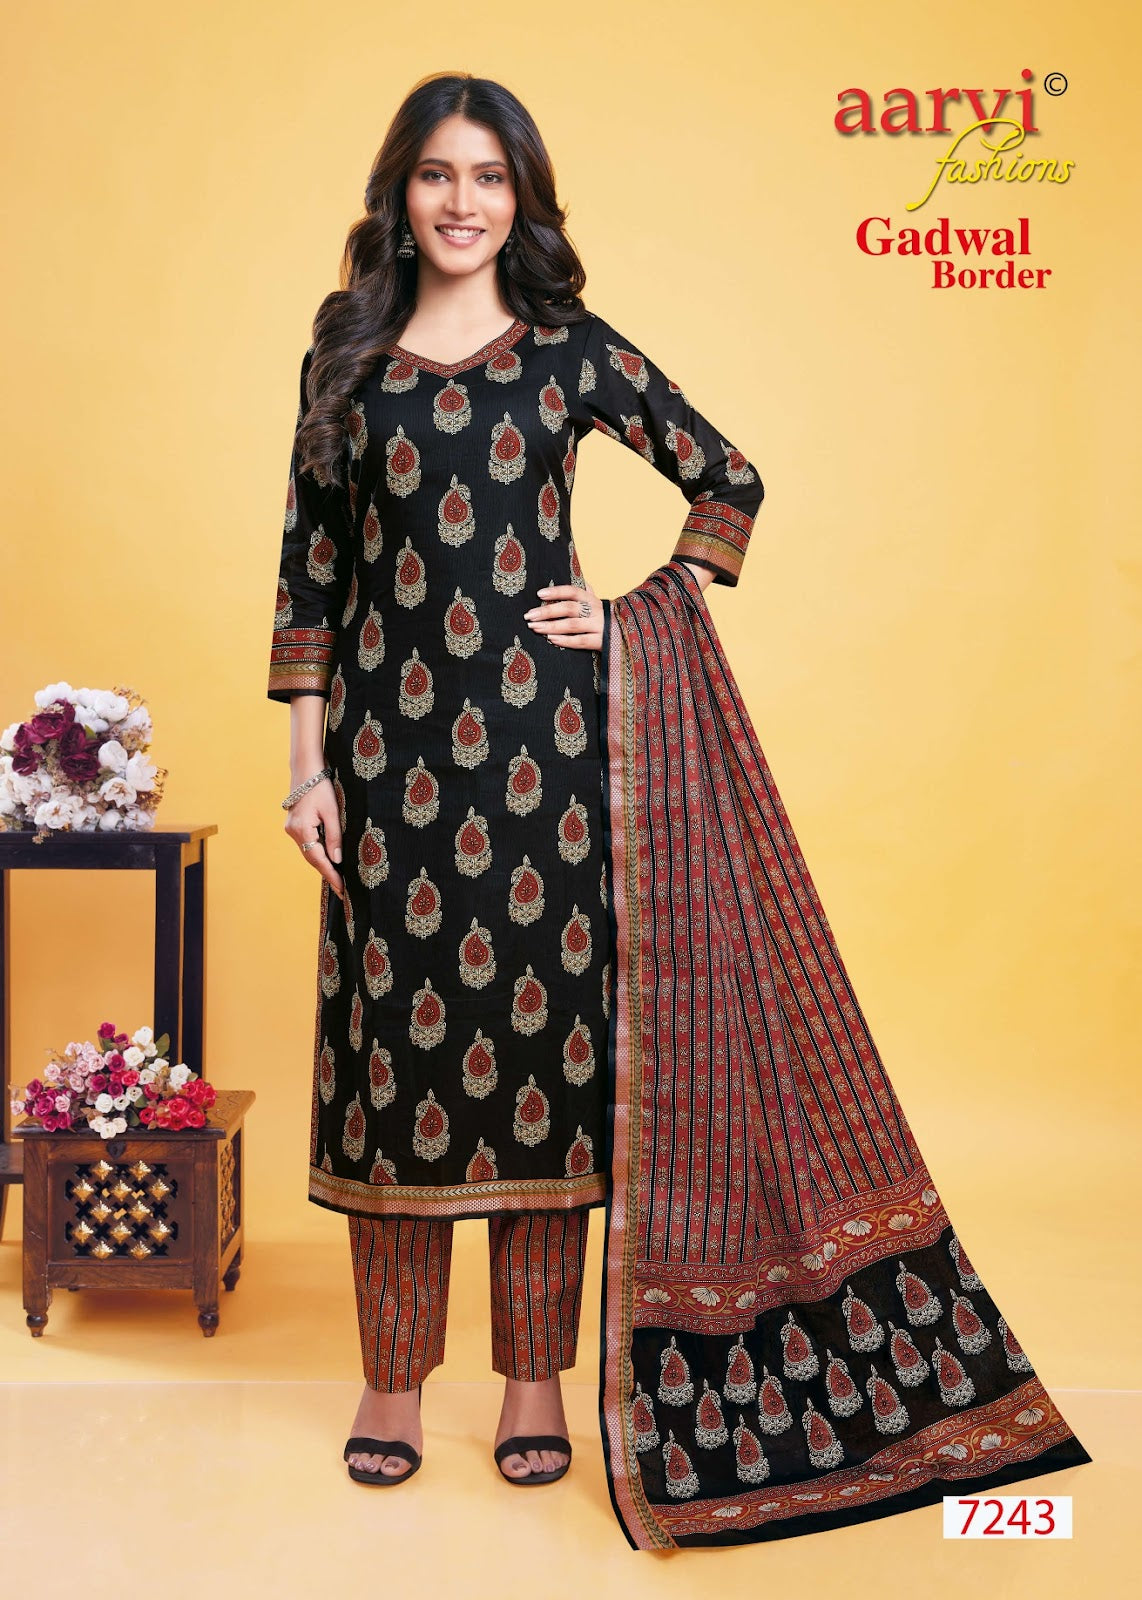 Gadwal Border Vol 9 Aarvi Fashions Readymade Pant Style Suits